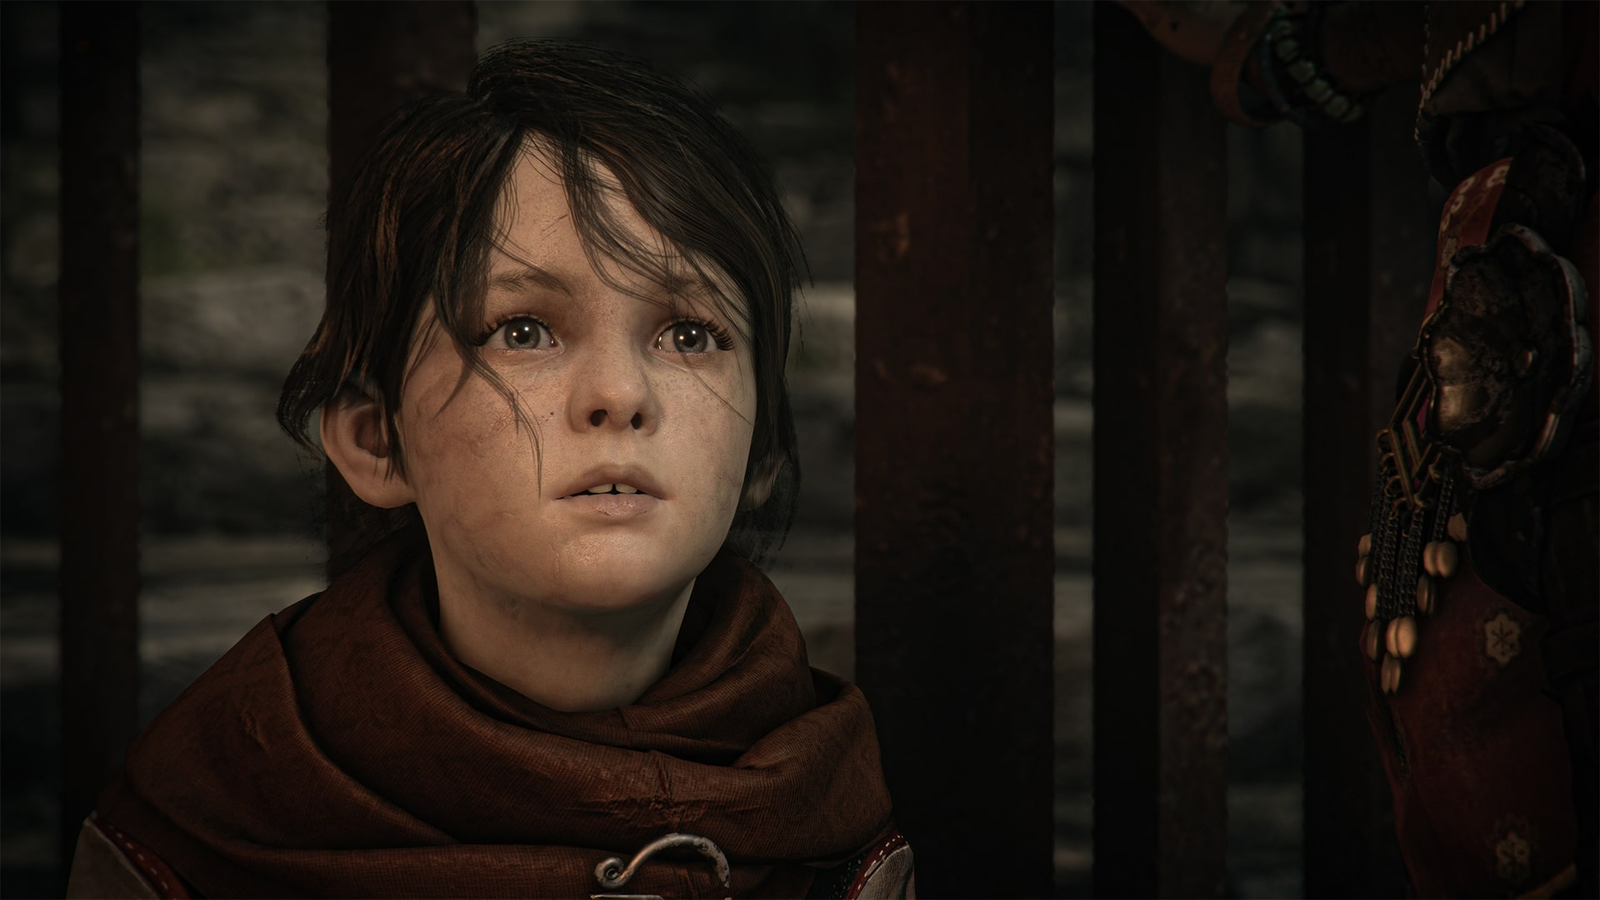 A Plague Tale: Requiem Gets New Gameplay Overview Trailer